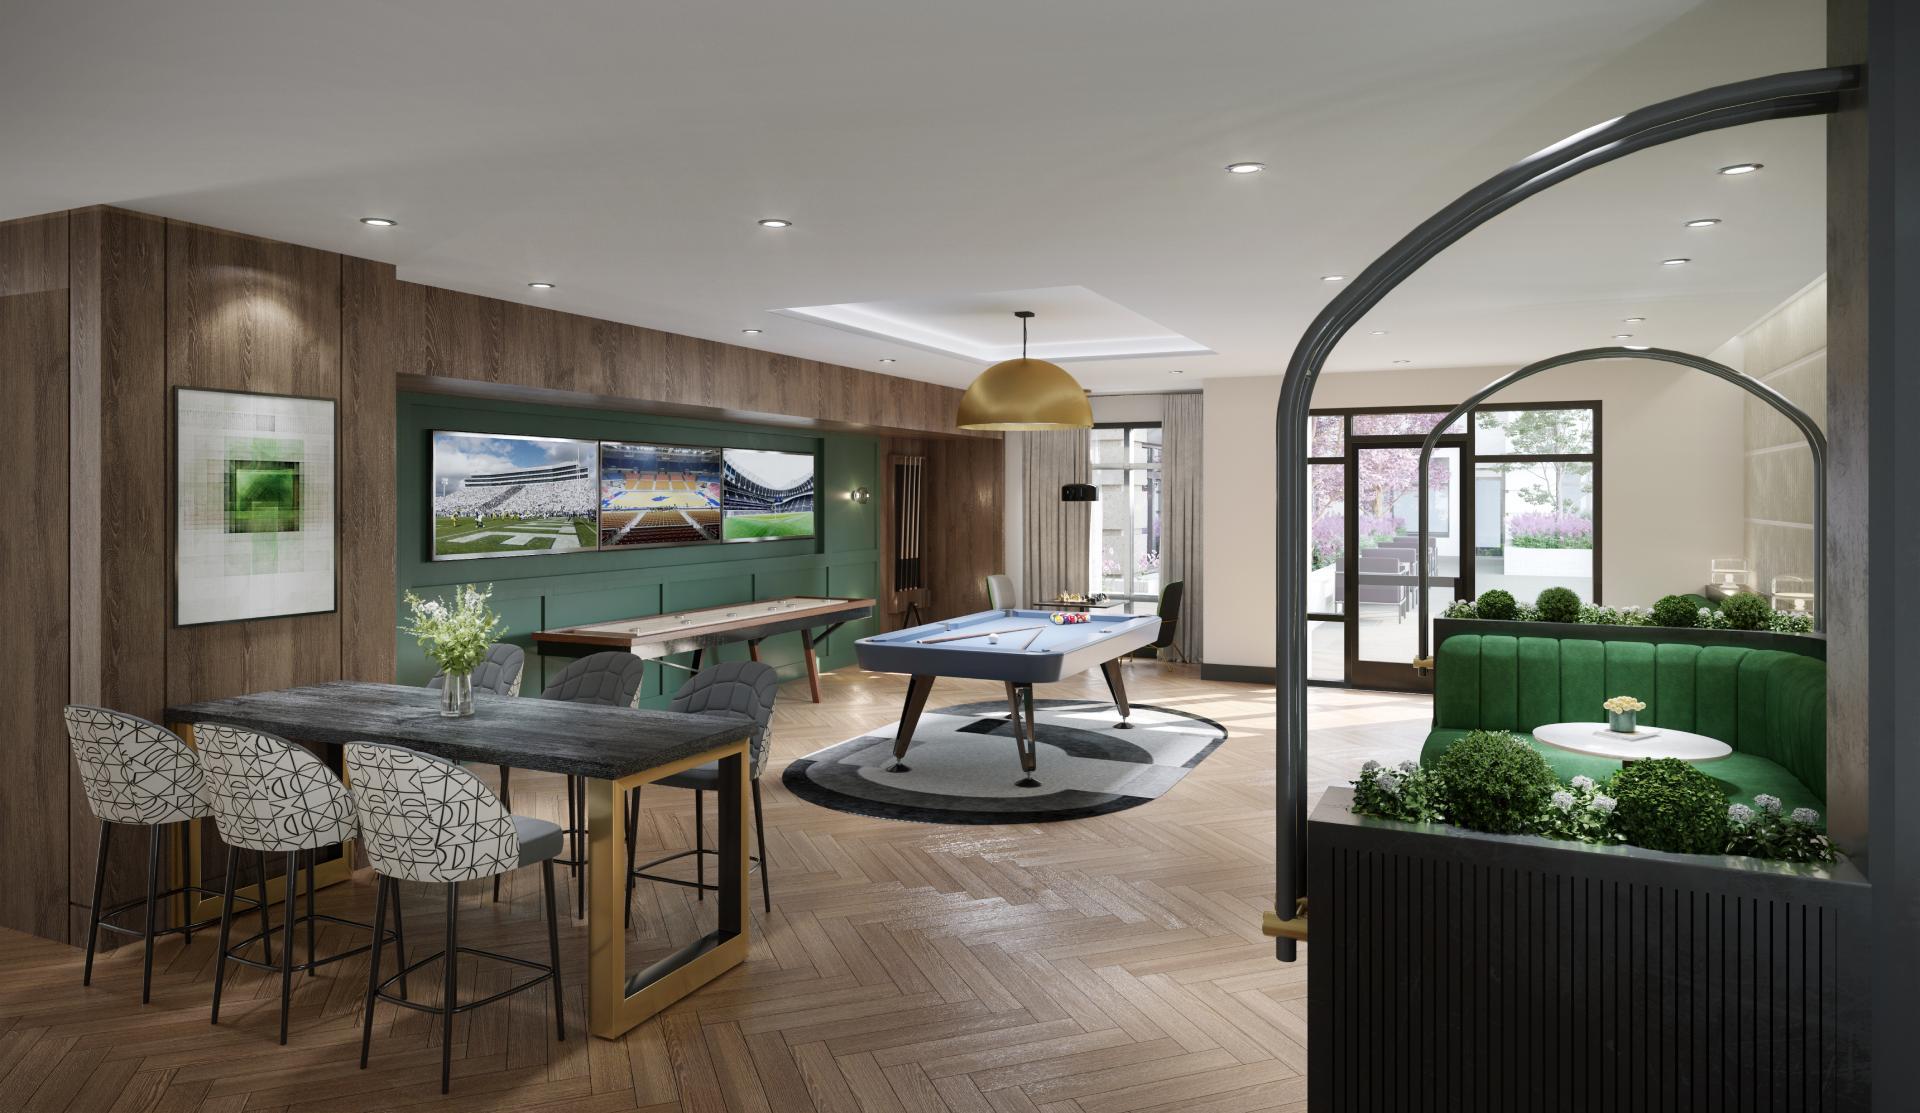 A rendering of an upscale clubroom with billiards table and multiple seating areas